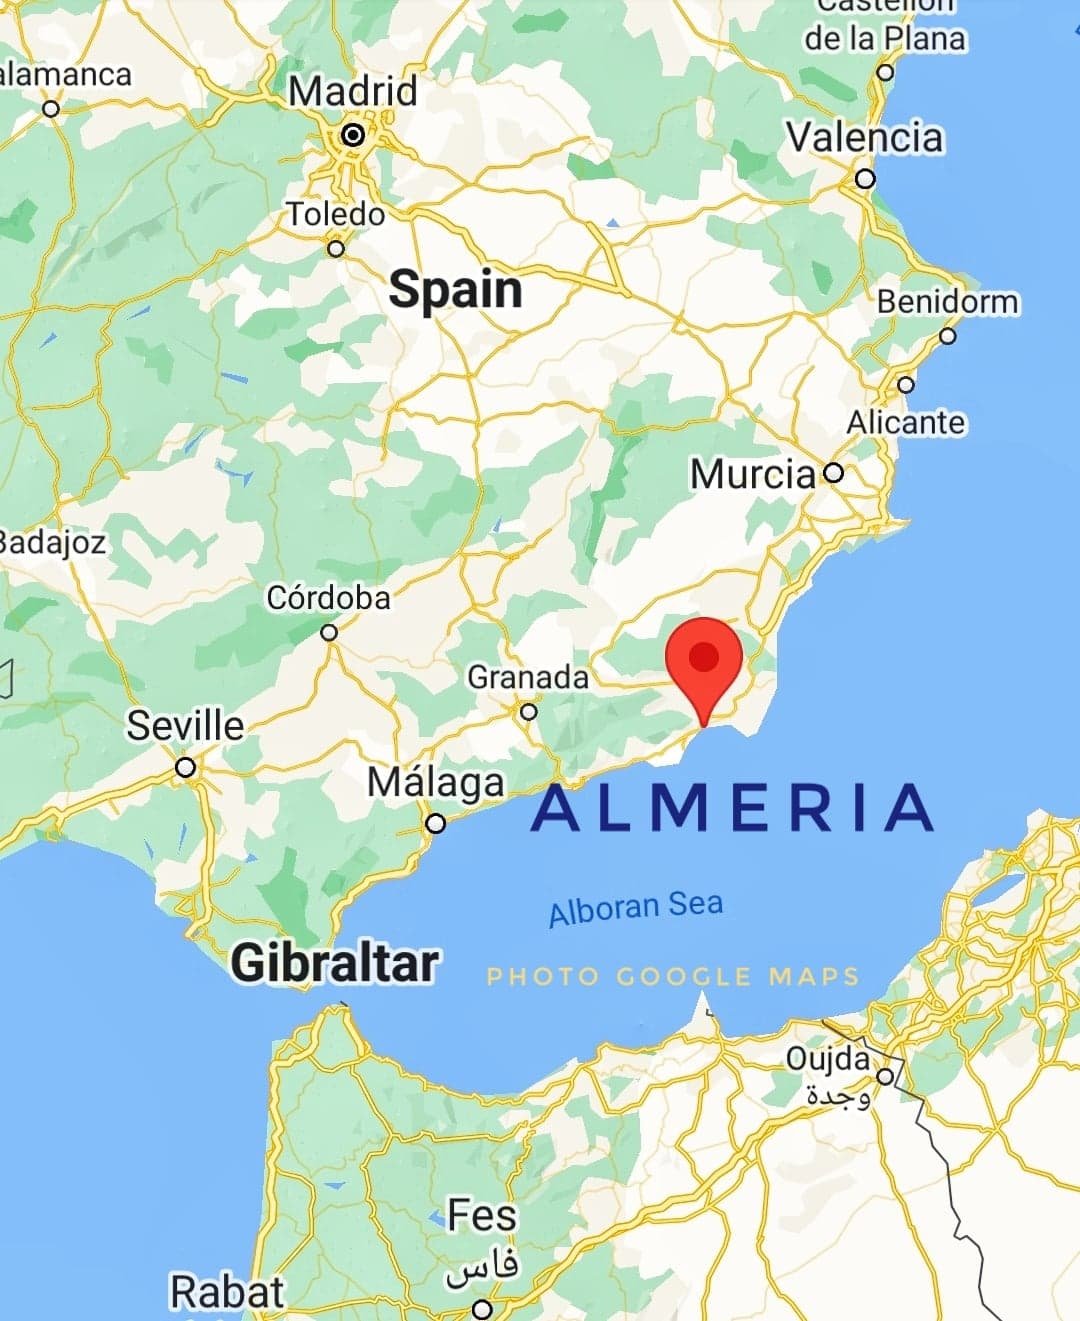 Almeria. things to do in Almeria, Spain. Travel to in Andalusia, Spain. — BEACH TRAVEL WINE